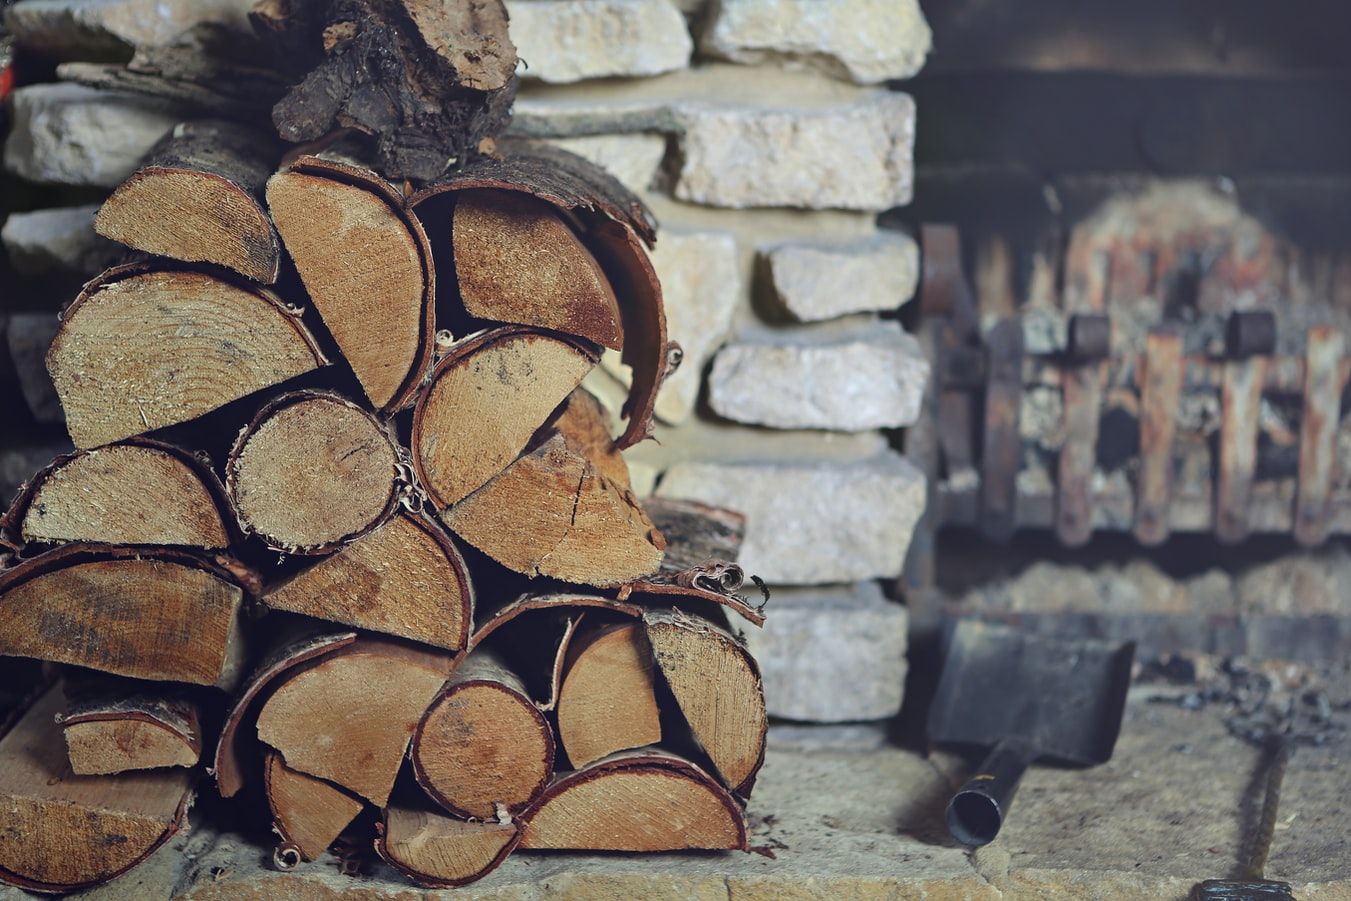 Firewood Ulverston, Tree Surgeon Ulverston | Viking Forestry: Serving the Lakes and Cumbria